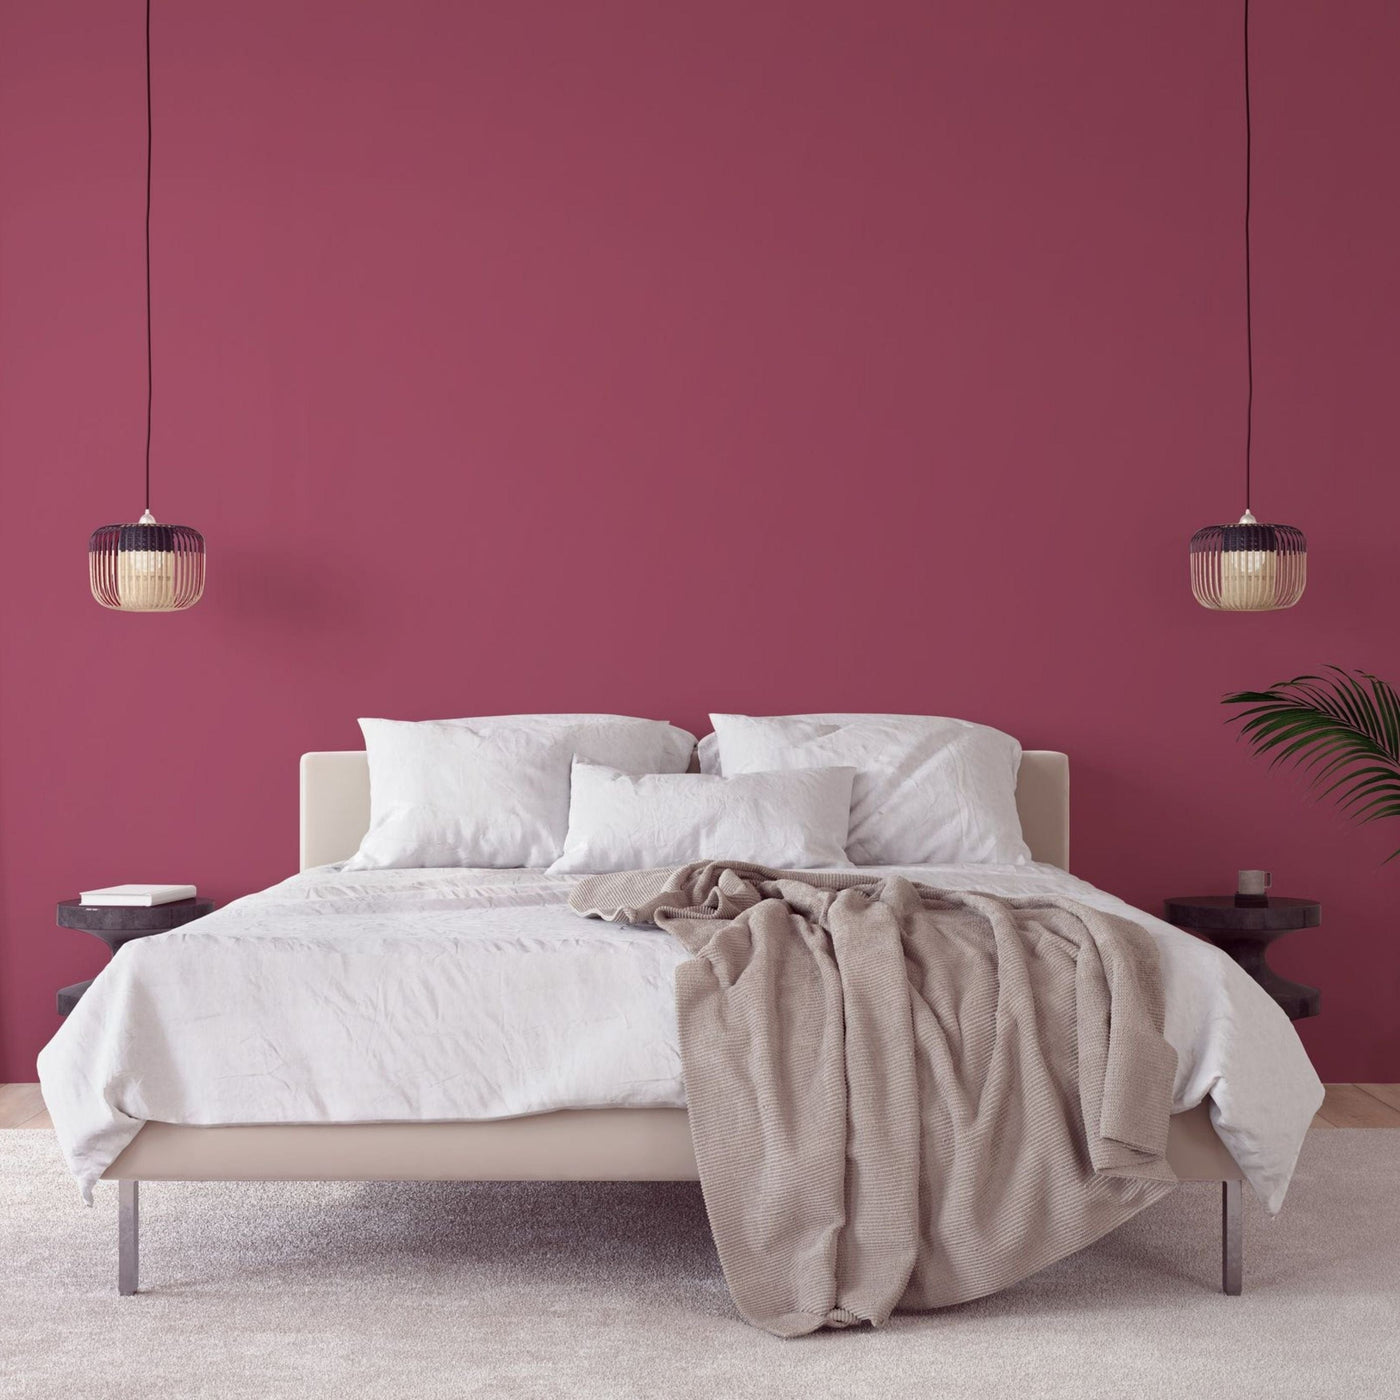 Bedroom with light and airy bedsheets and a vibrant painted wall in the color Cherry Berry